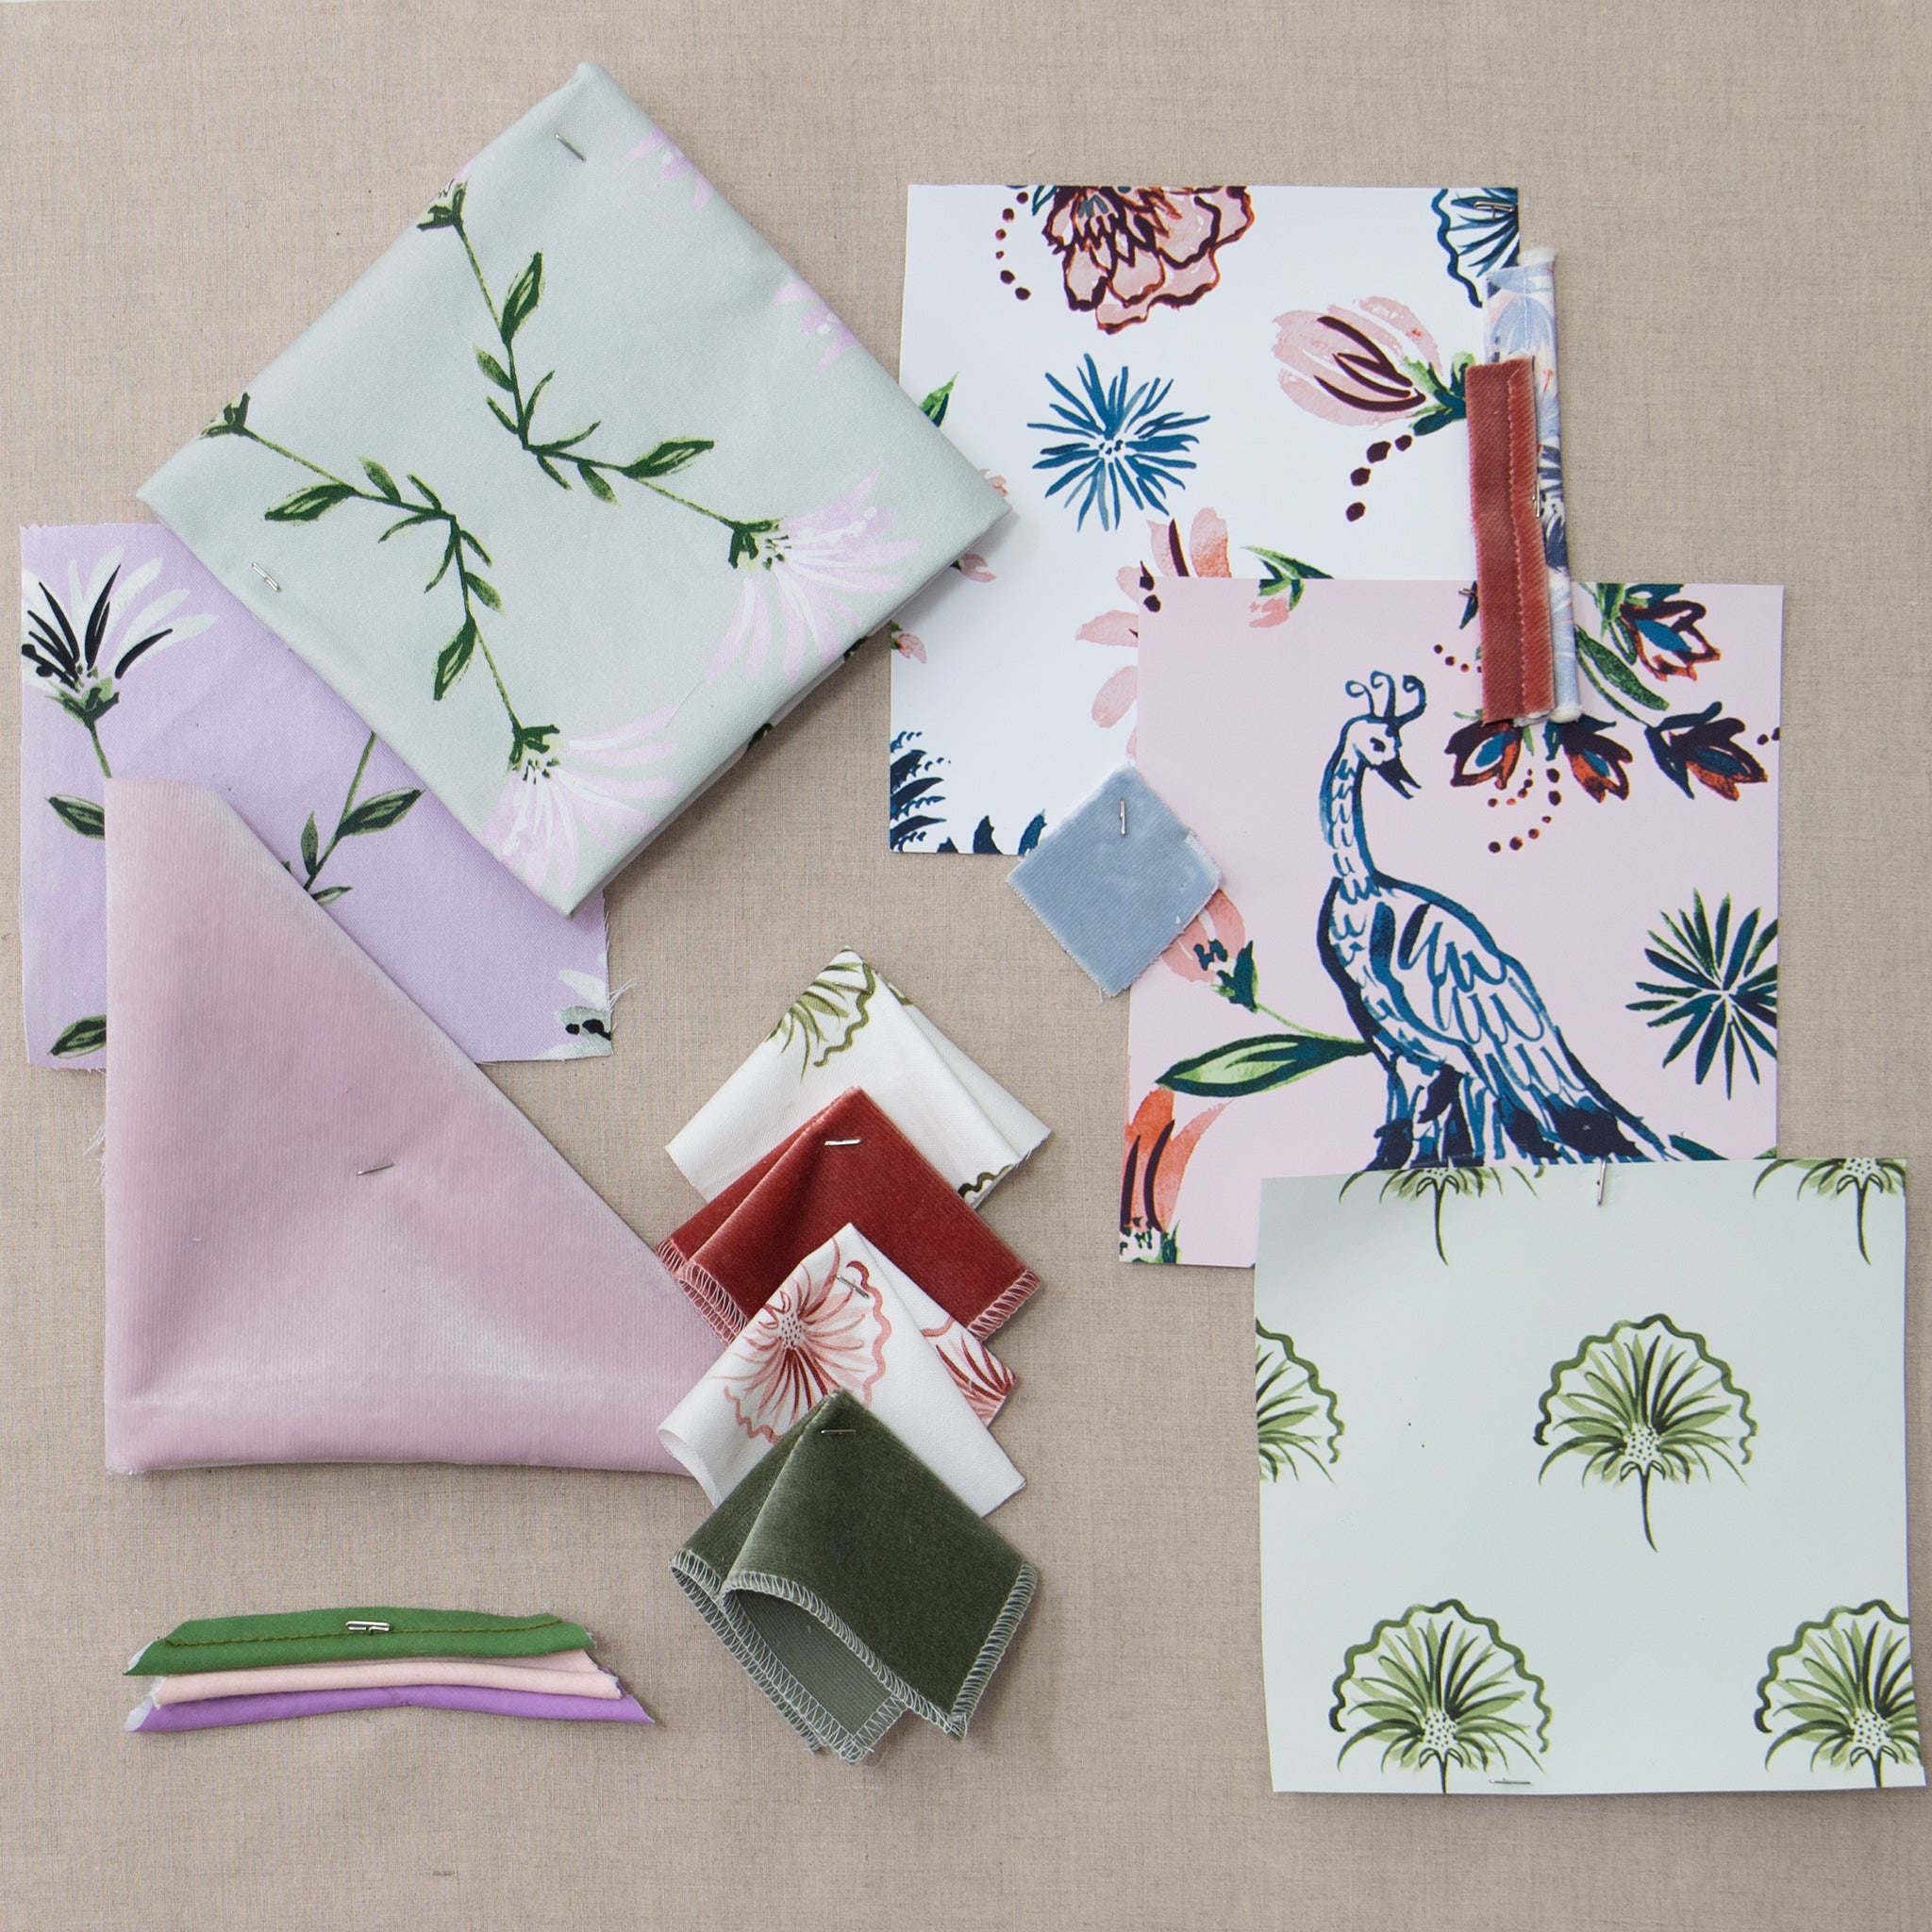 Interior design moodboard and fabric inspirations with Coral Velvet swatch, Pink Chinoiserie printed cotton swatch, Cream Chinoiserie Printed Swatch, Fern Velvet swatch, Lavender Floral printed swatch, and Green Floral printed cotton swatch